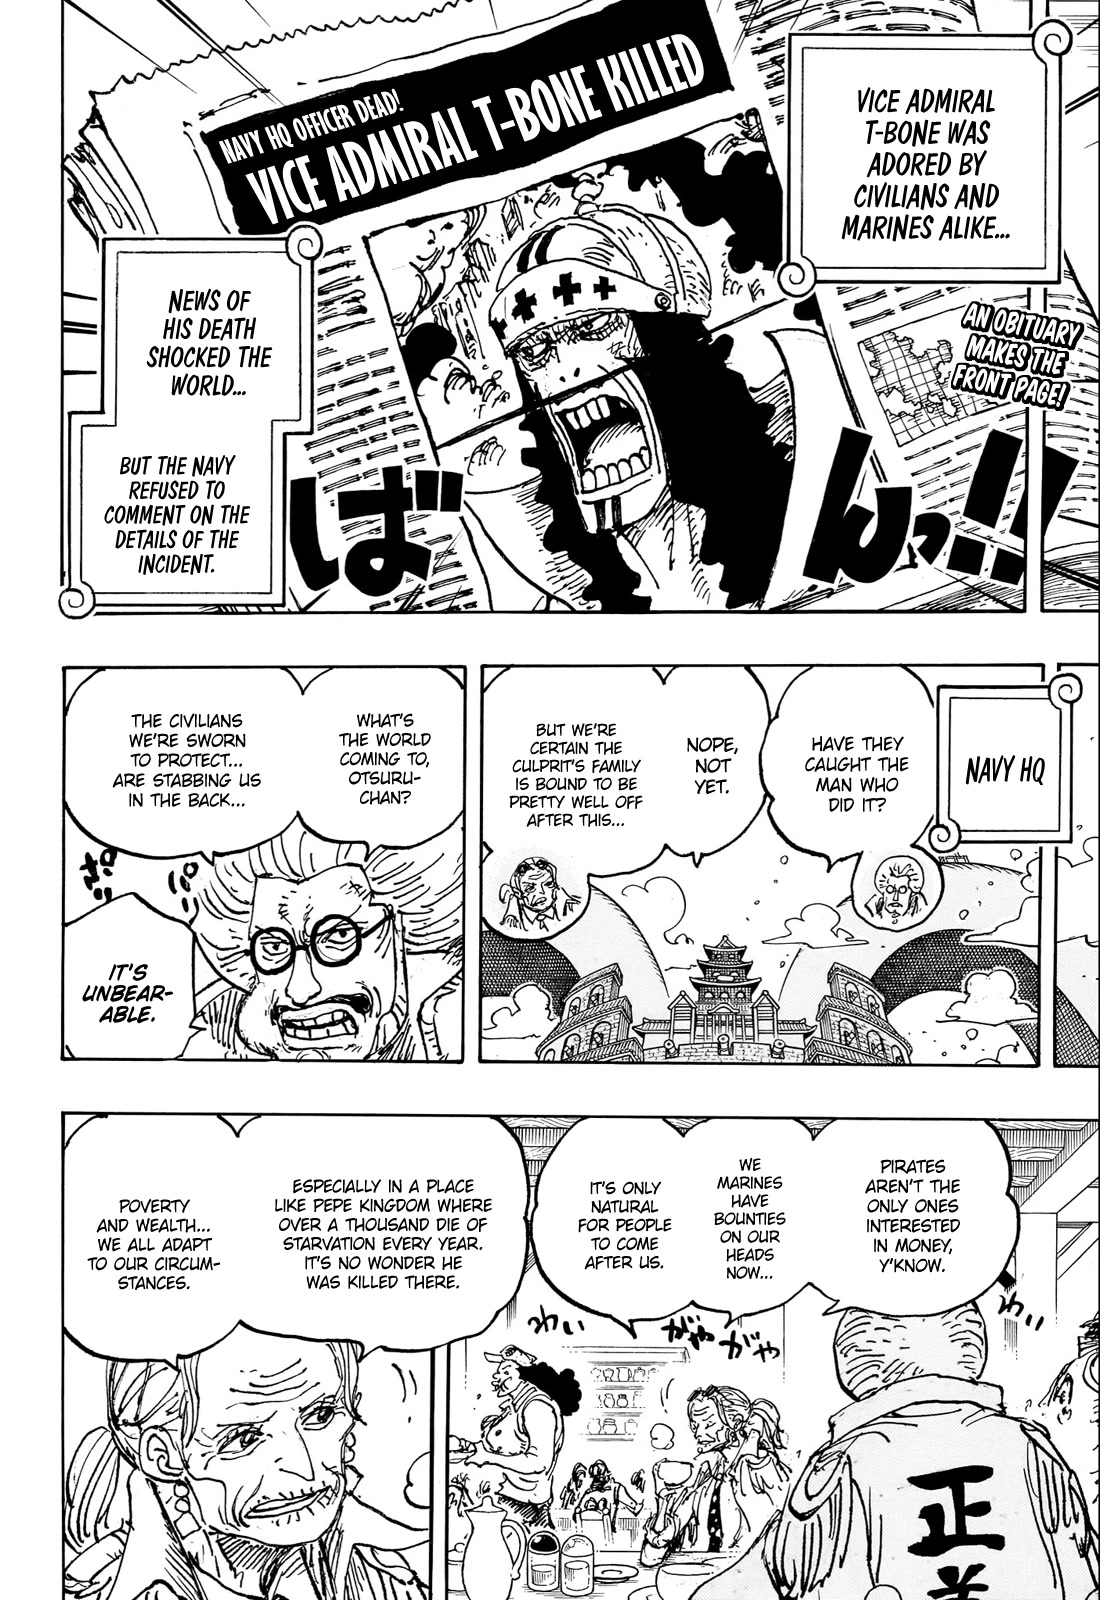 One piece, Chapter 1082 Let